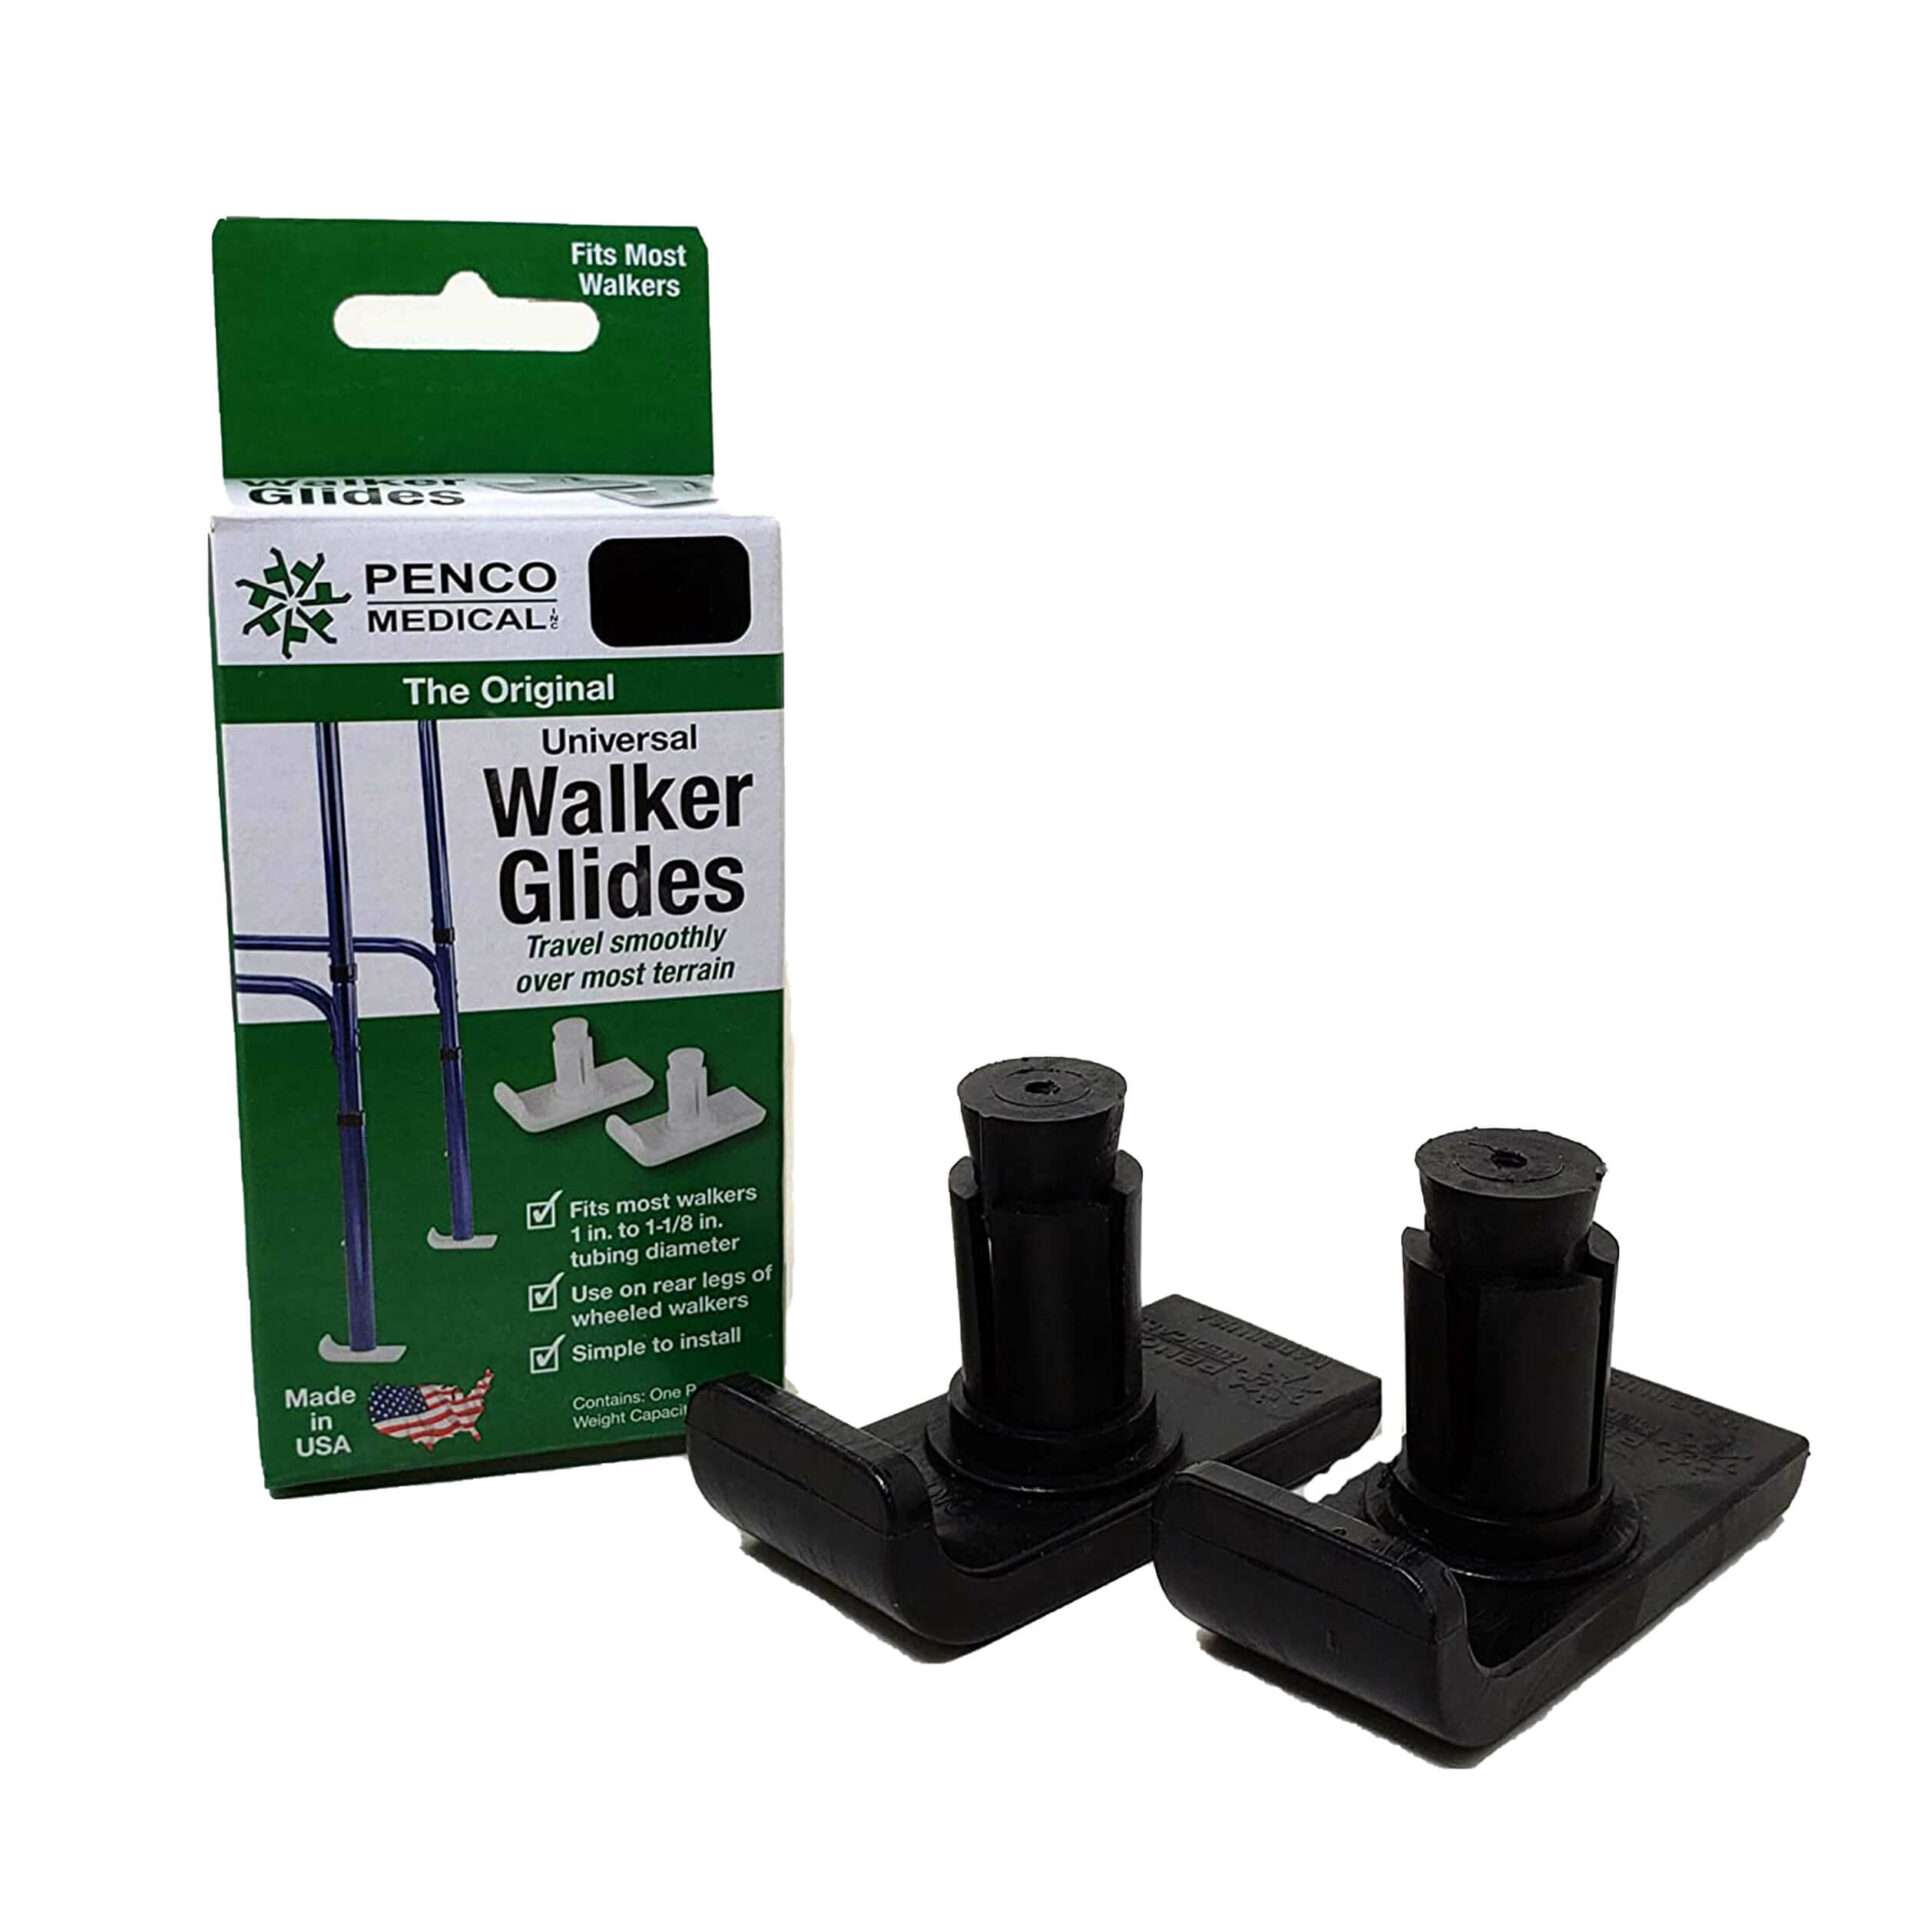 Glides for walking frame with packaging